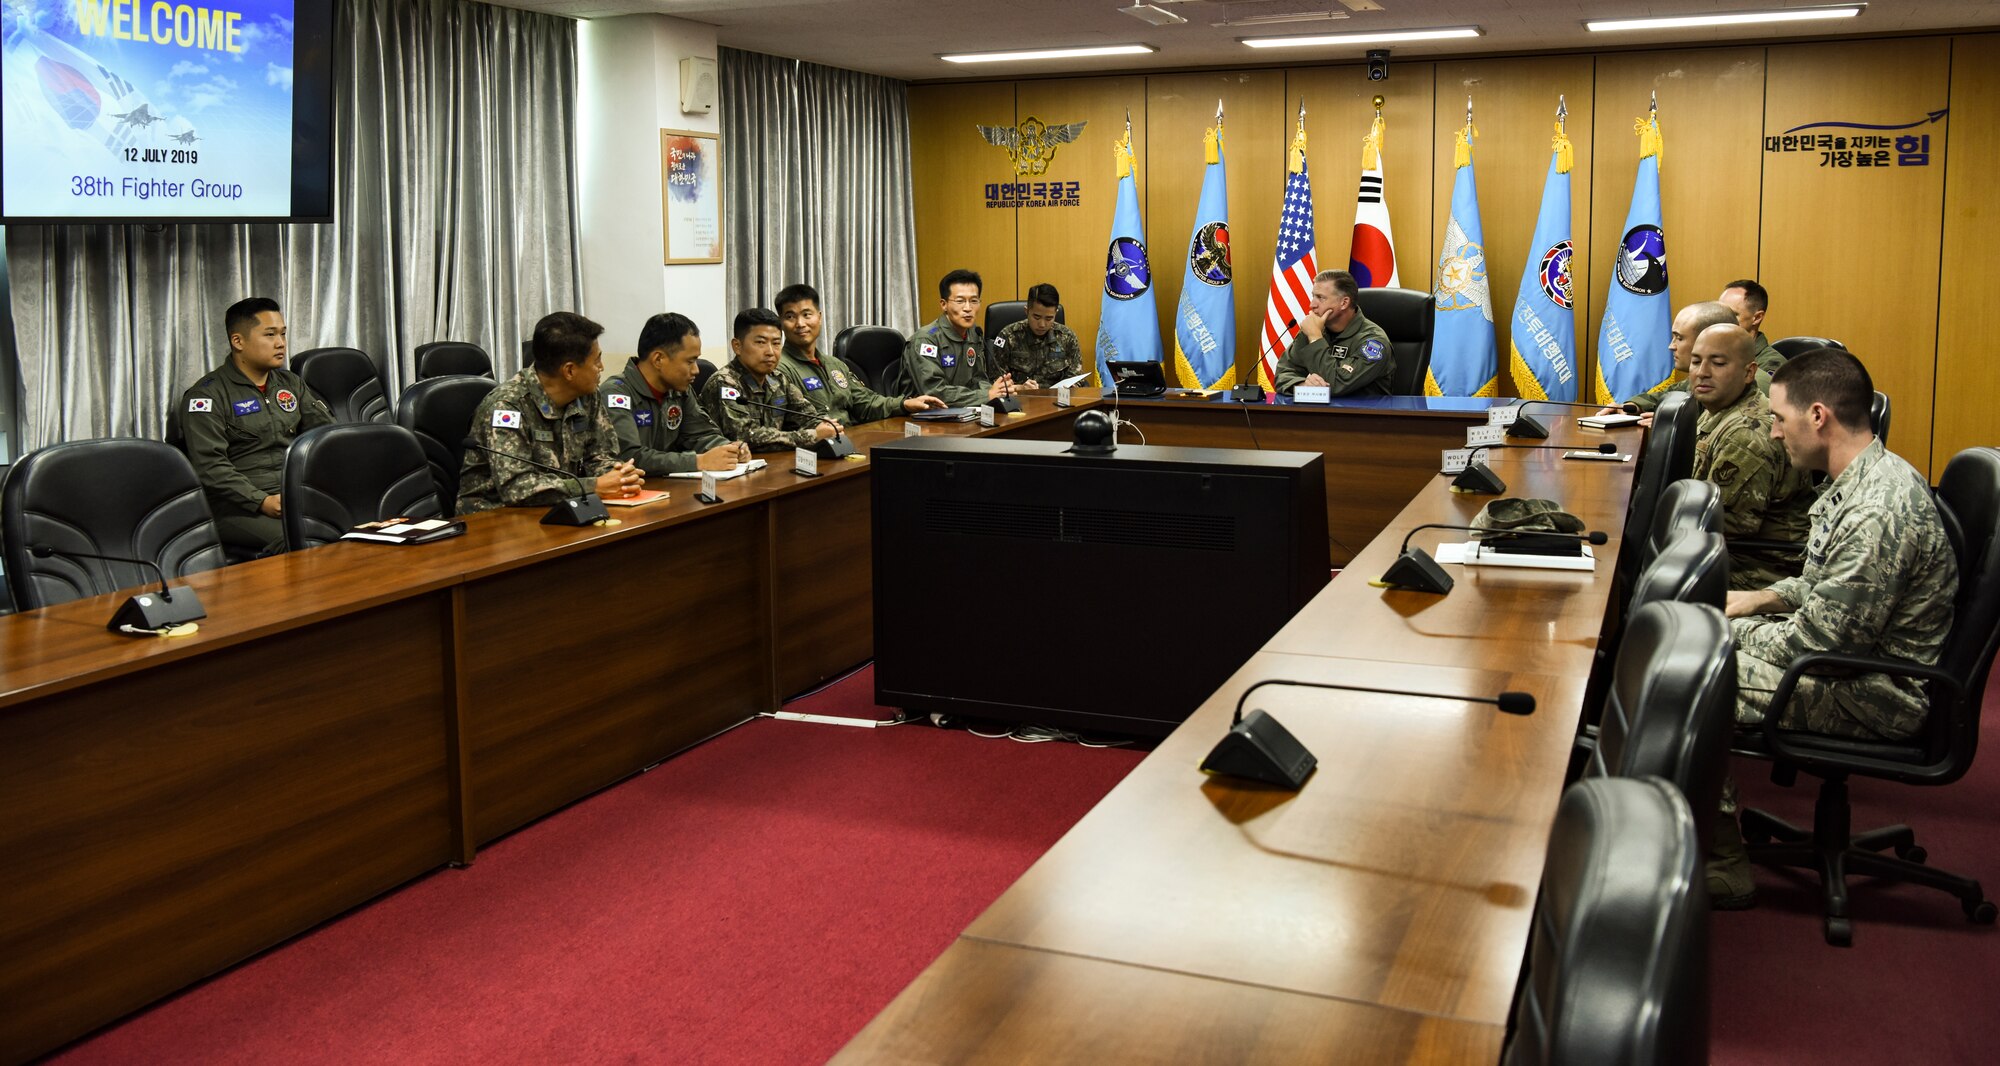 U.S. Air Force Brig. Gen. David Eaglin (center), 7th Air Force vice commander, converses with 8th Fighter Wing and 38th Fighter Group leadership at Kunsan Air Base, Republic of Korea, July 12, 2019. Eaglin visited Kunsan and Republic of Korea Air Force’s 38th FG to introduce himself and strengthen the partnership between the U.S. and ROK. (U.S. Air Force photo by Staff Sgt. Joshua Edwards)